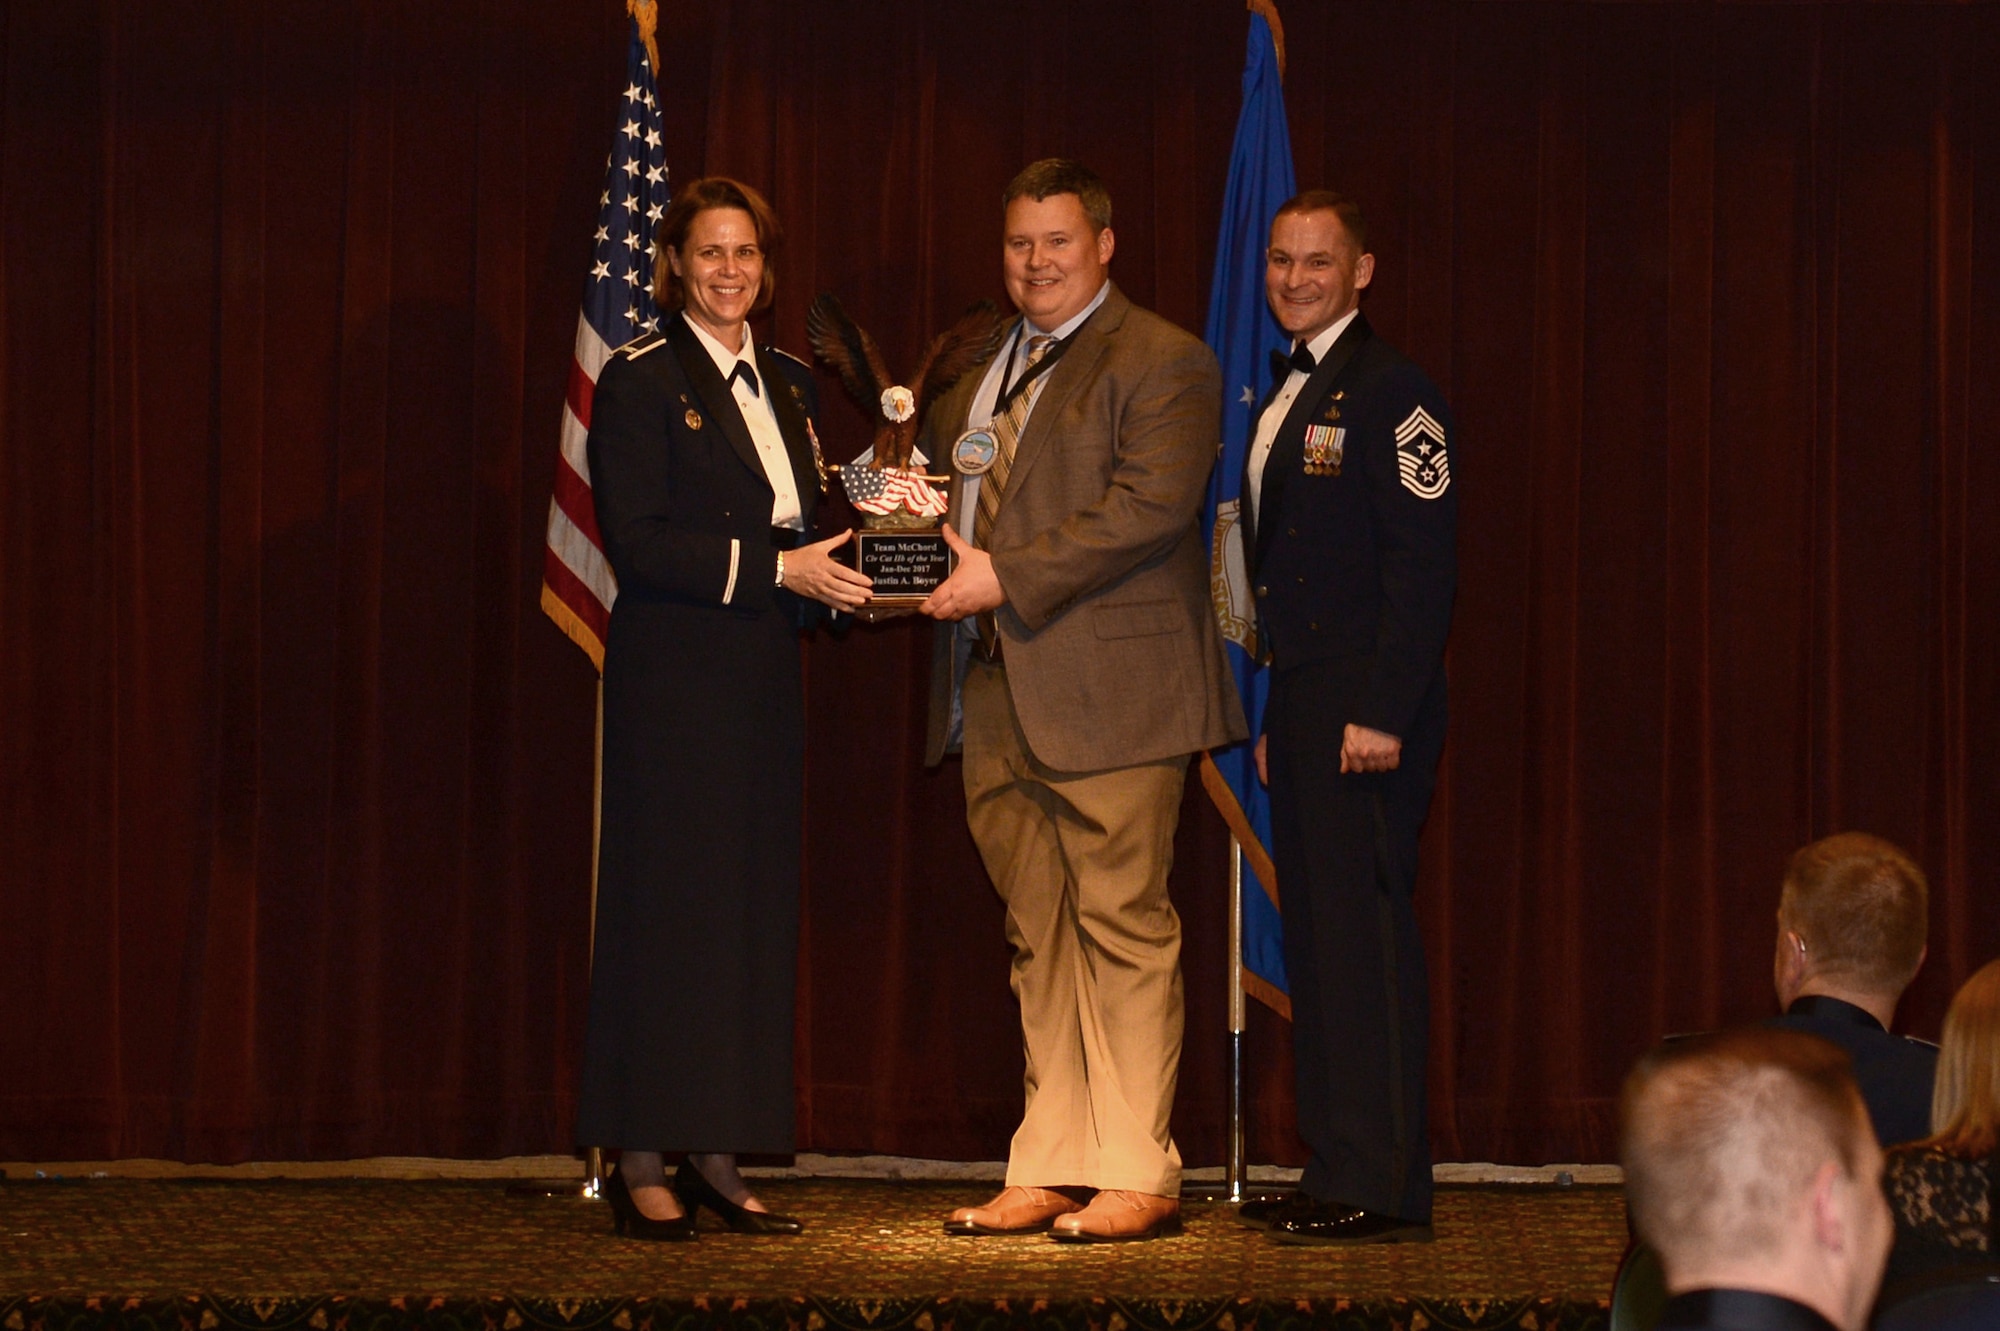 Justin Boyer, 62nd Airlift Wing, Maintenance squadron, receives an award for the Civilian Category IIB at the 2017 Team McChord Annual Awards Banquet at the McChord Field Club, Joint Base Lewis-McChord, Wash., Feb. 23, 2018. The annual awards included both the civilian and military members of Team McChord.